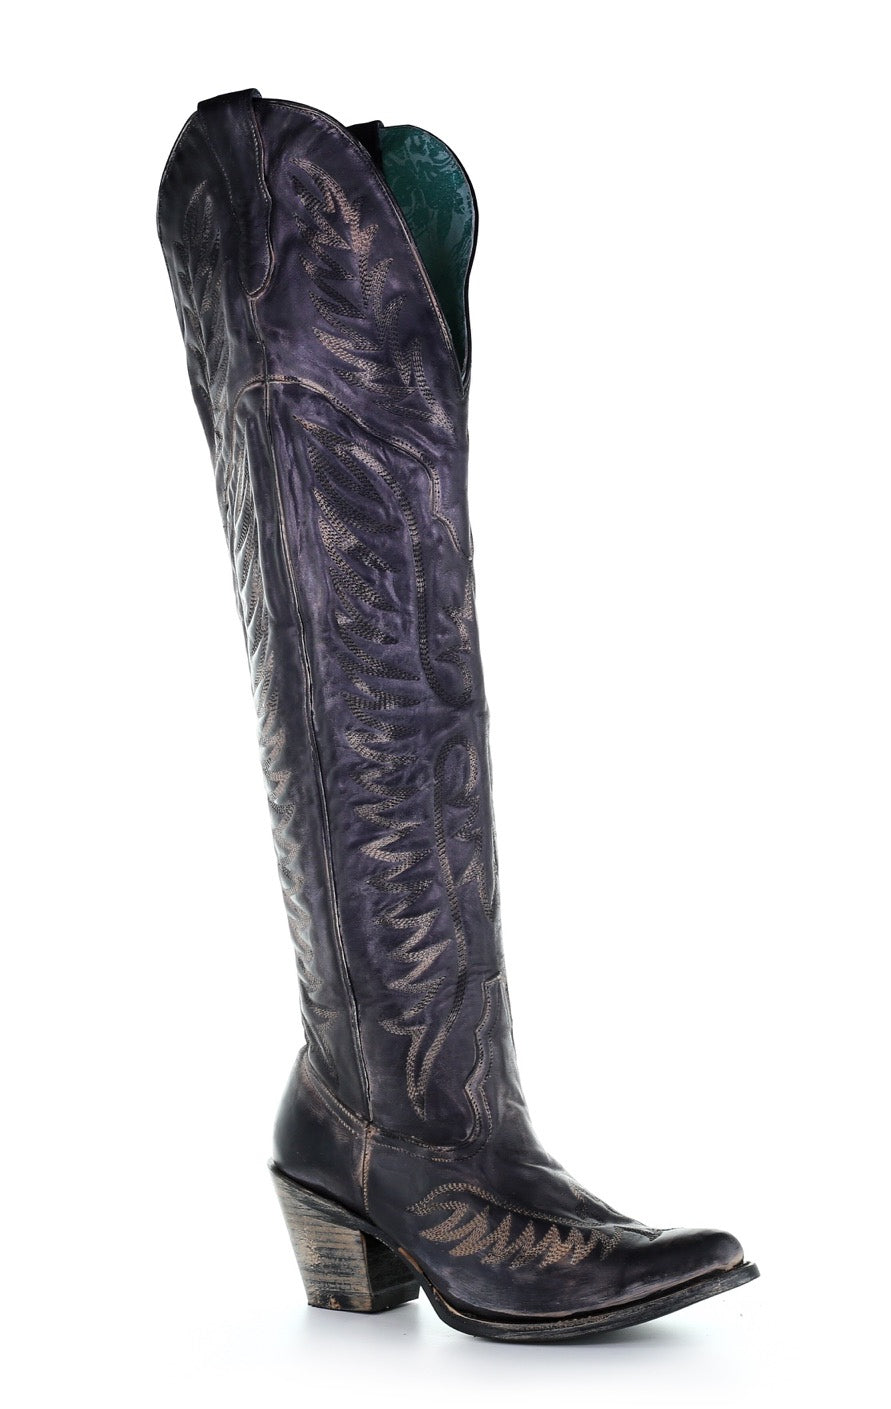 Corral Black Tall Western Boots